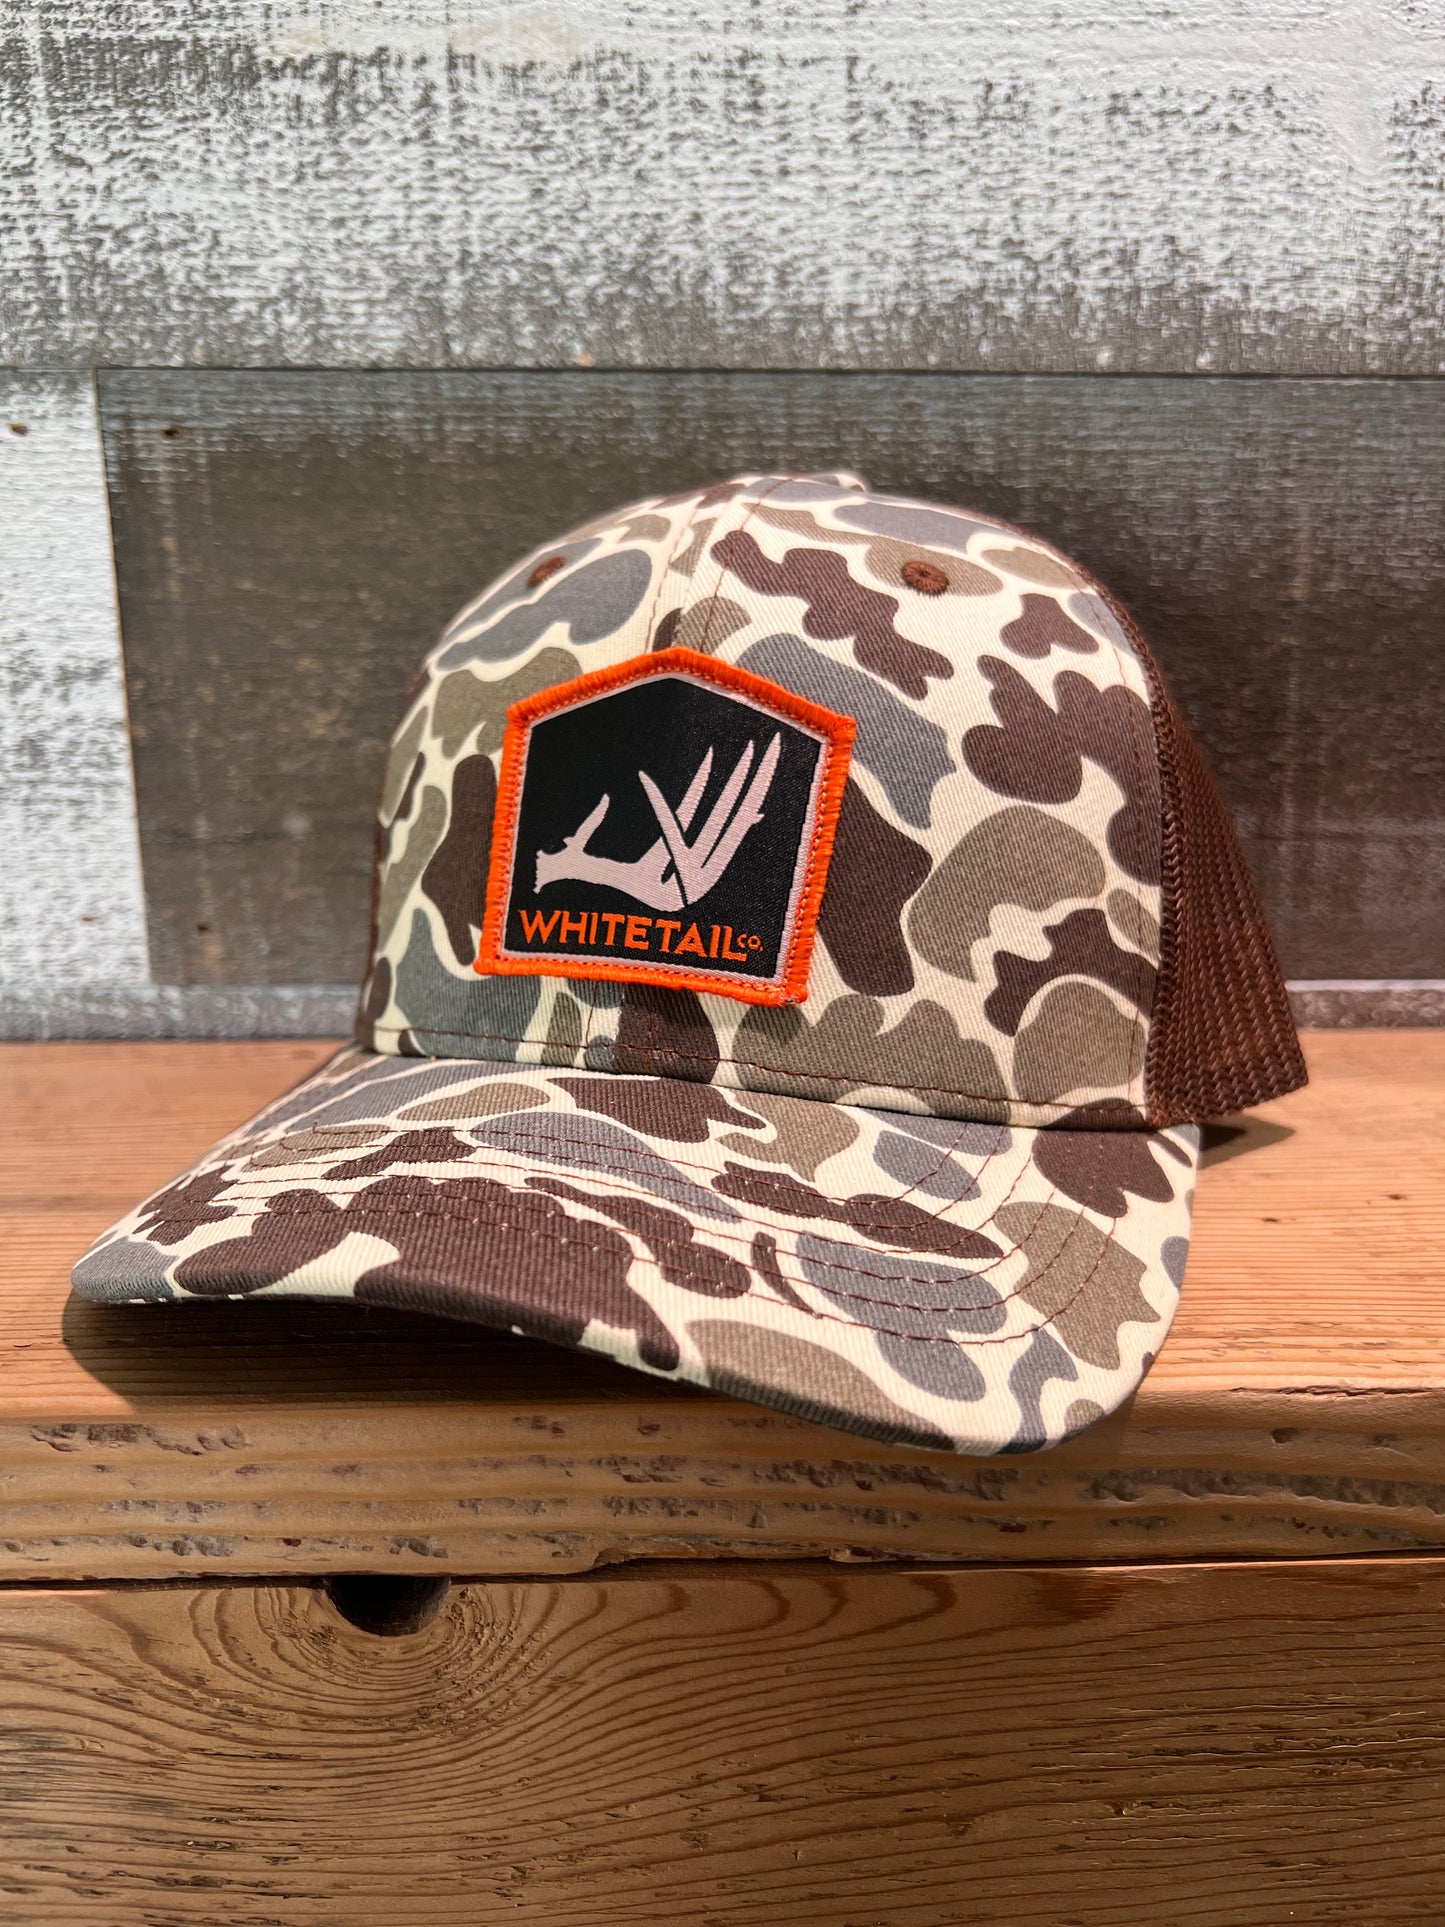 Whitetail Co. Old School Camo Mesh Back